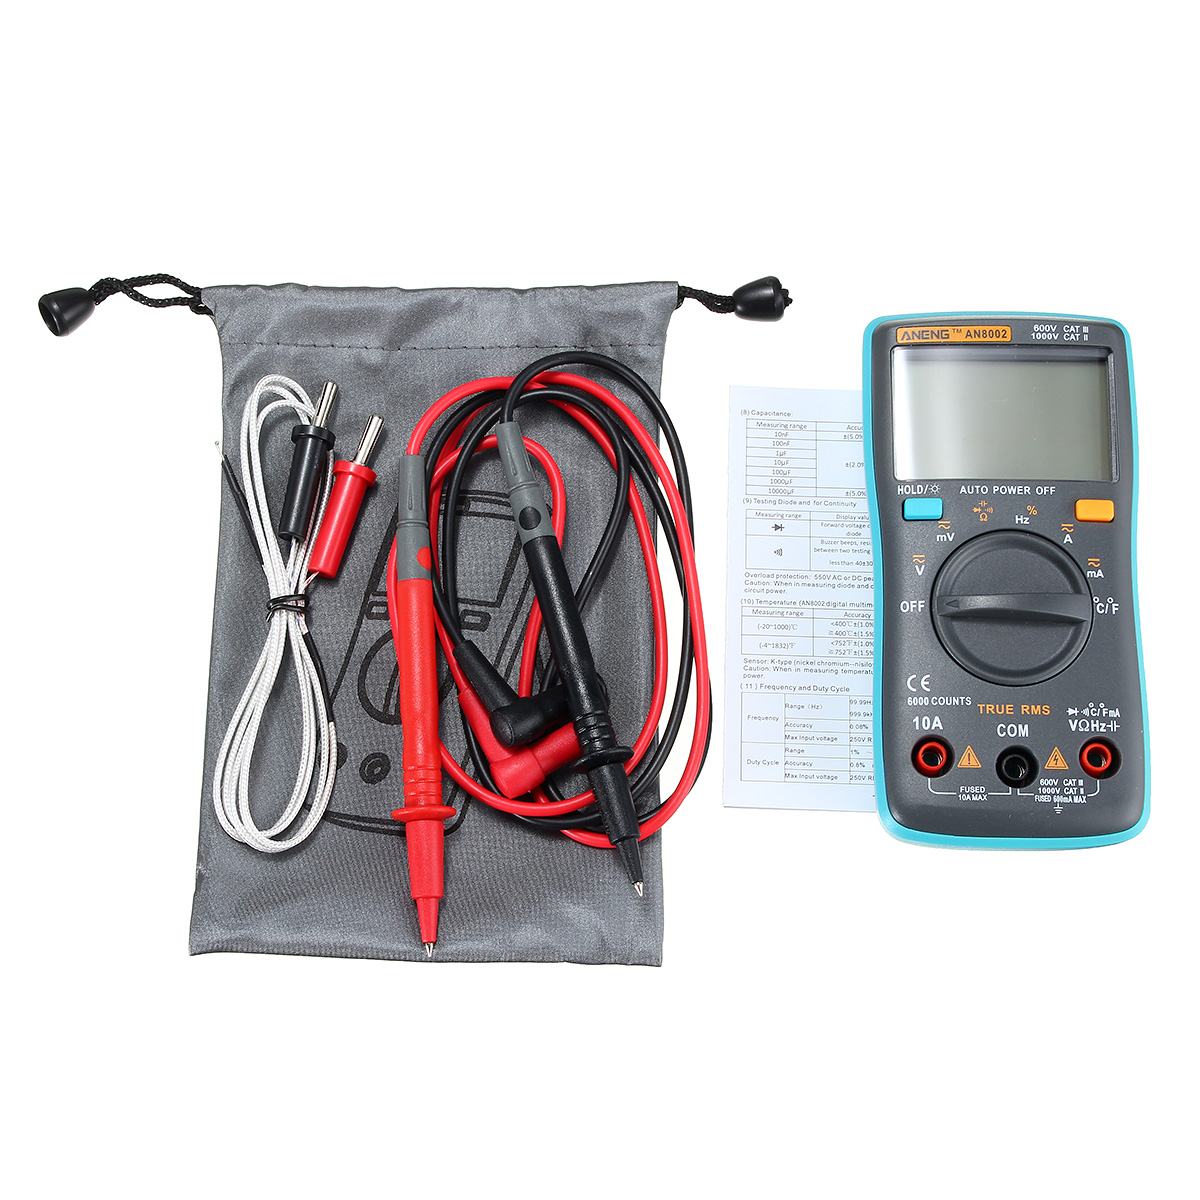 ANENG AN8002 Digital True RMS 6000 Counts Multimeter AC/DC Current Voltage Frequency Resistance Temperature Tester ℃/℉ 154